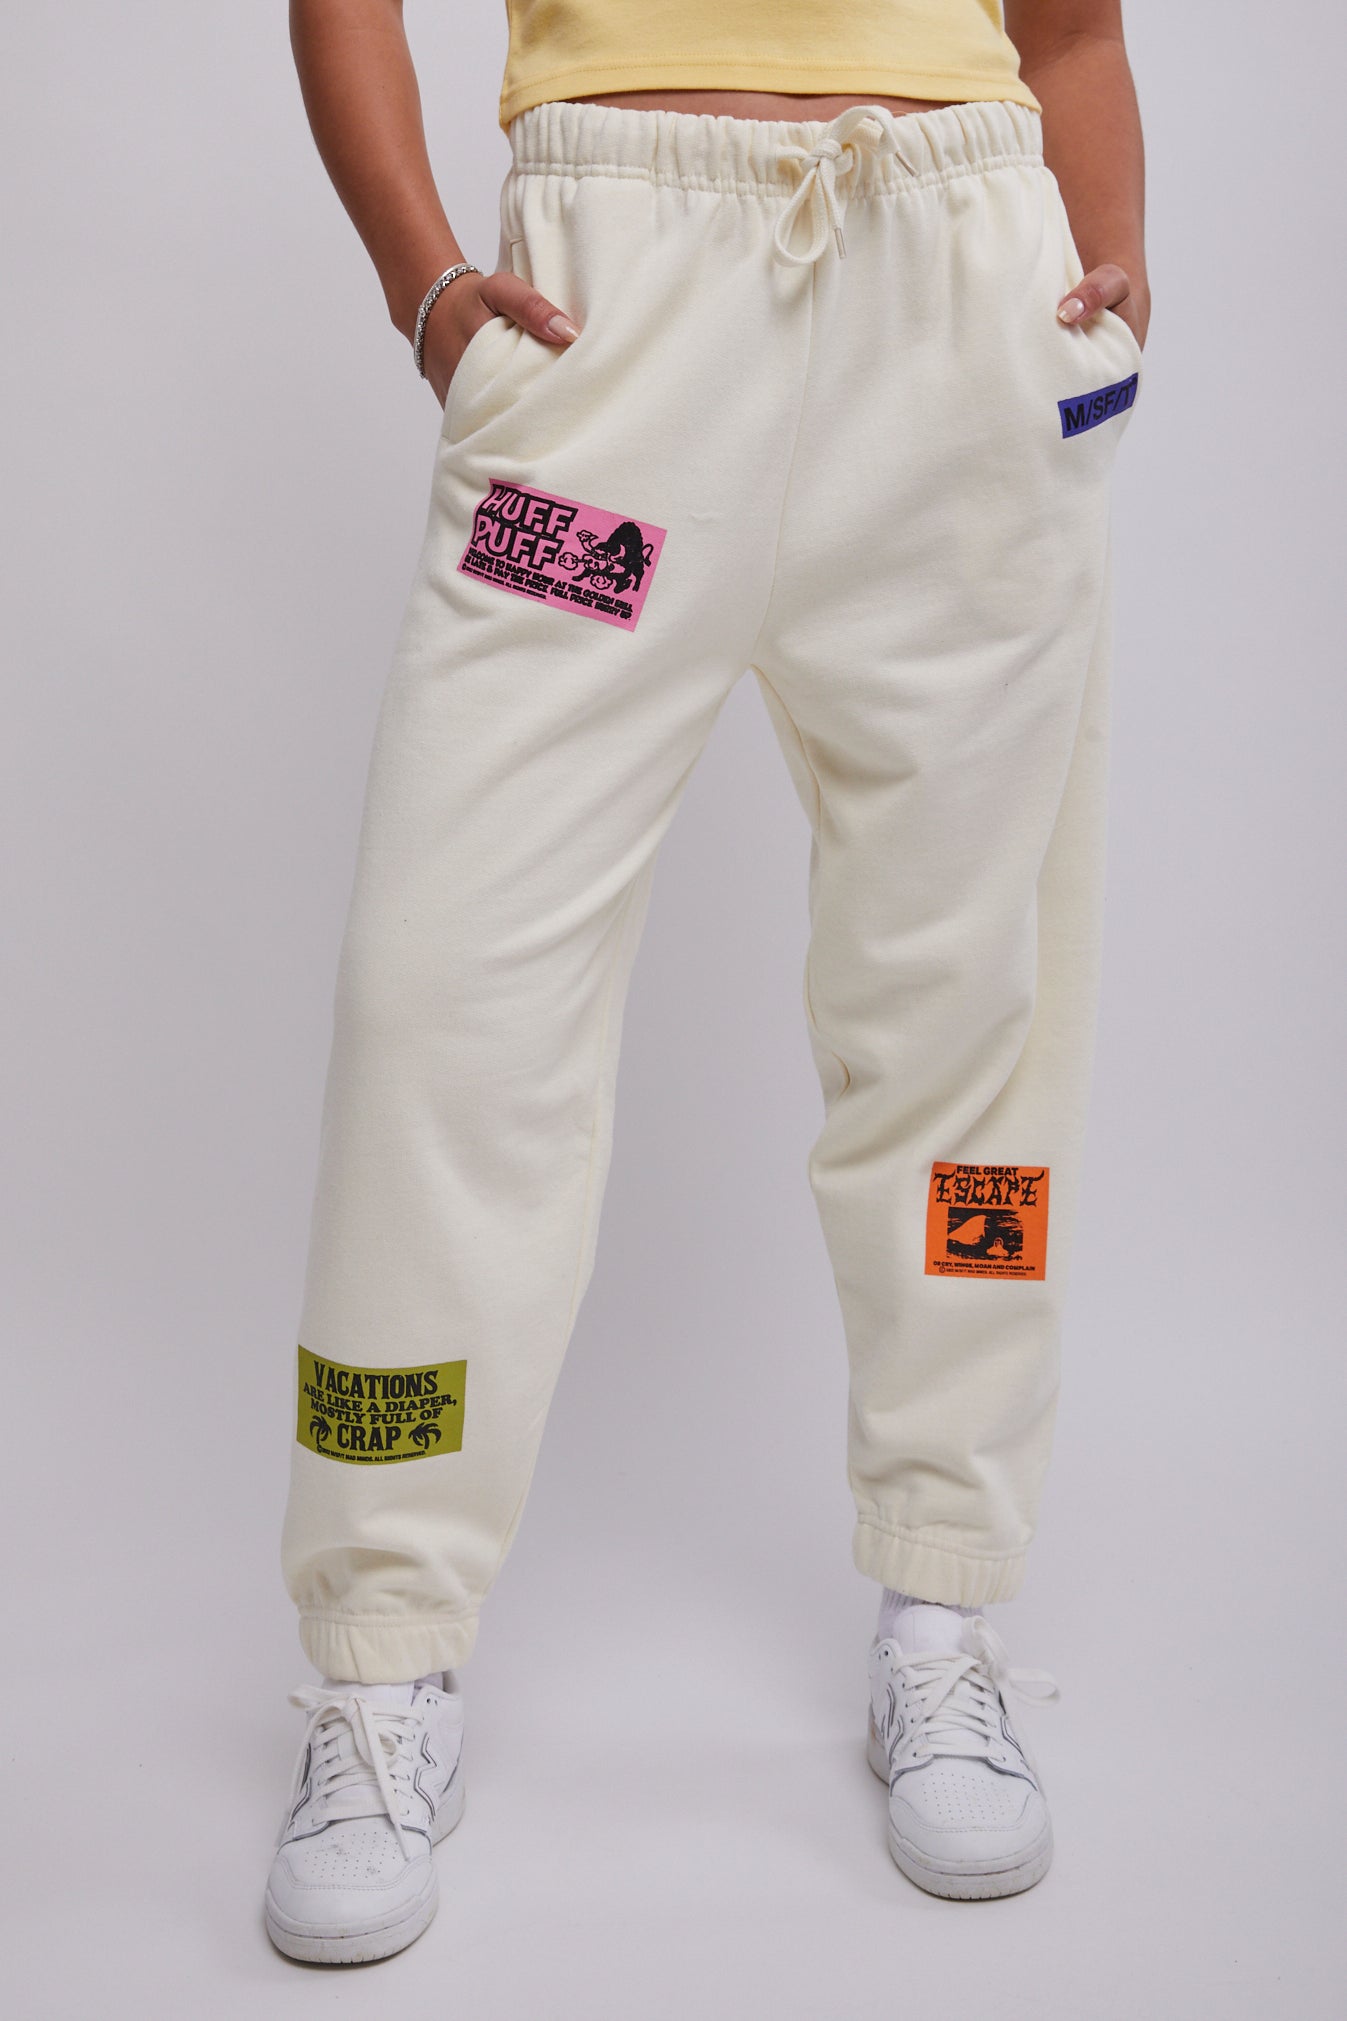 Discover 127+ funky track pants latest